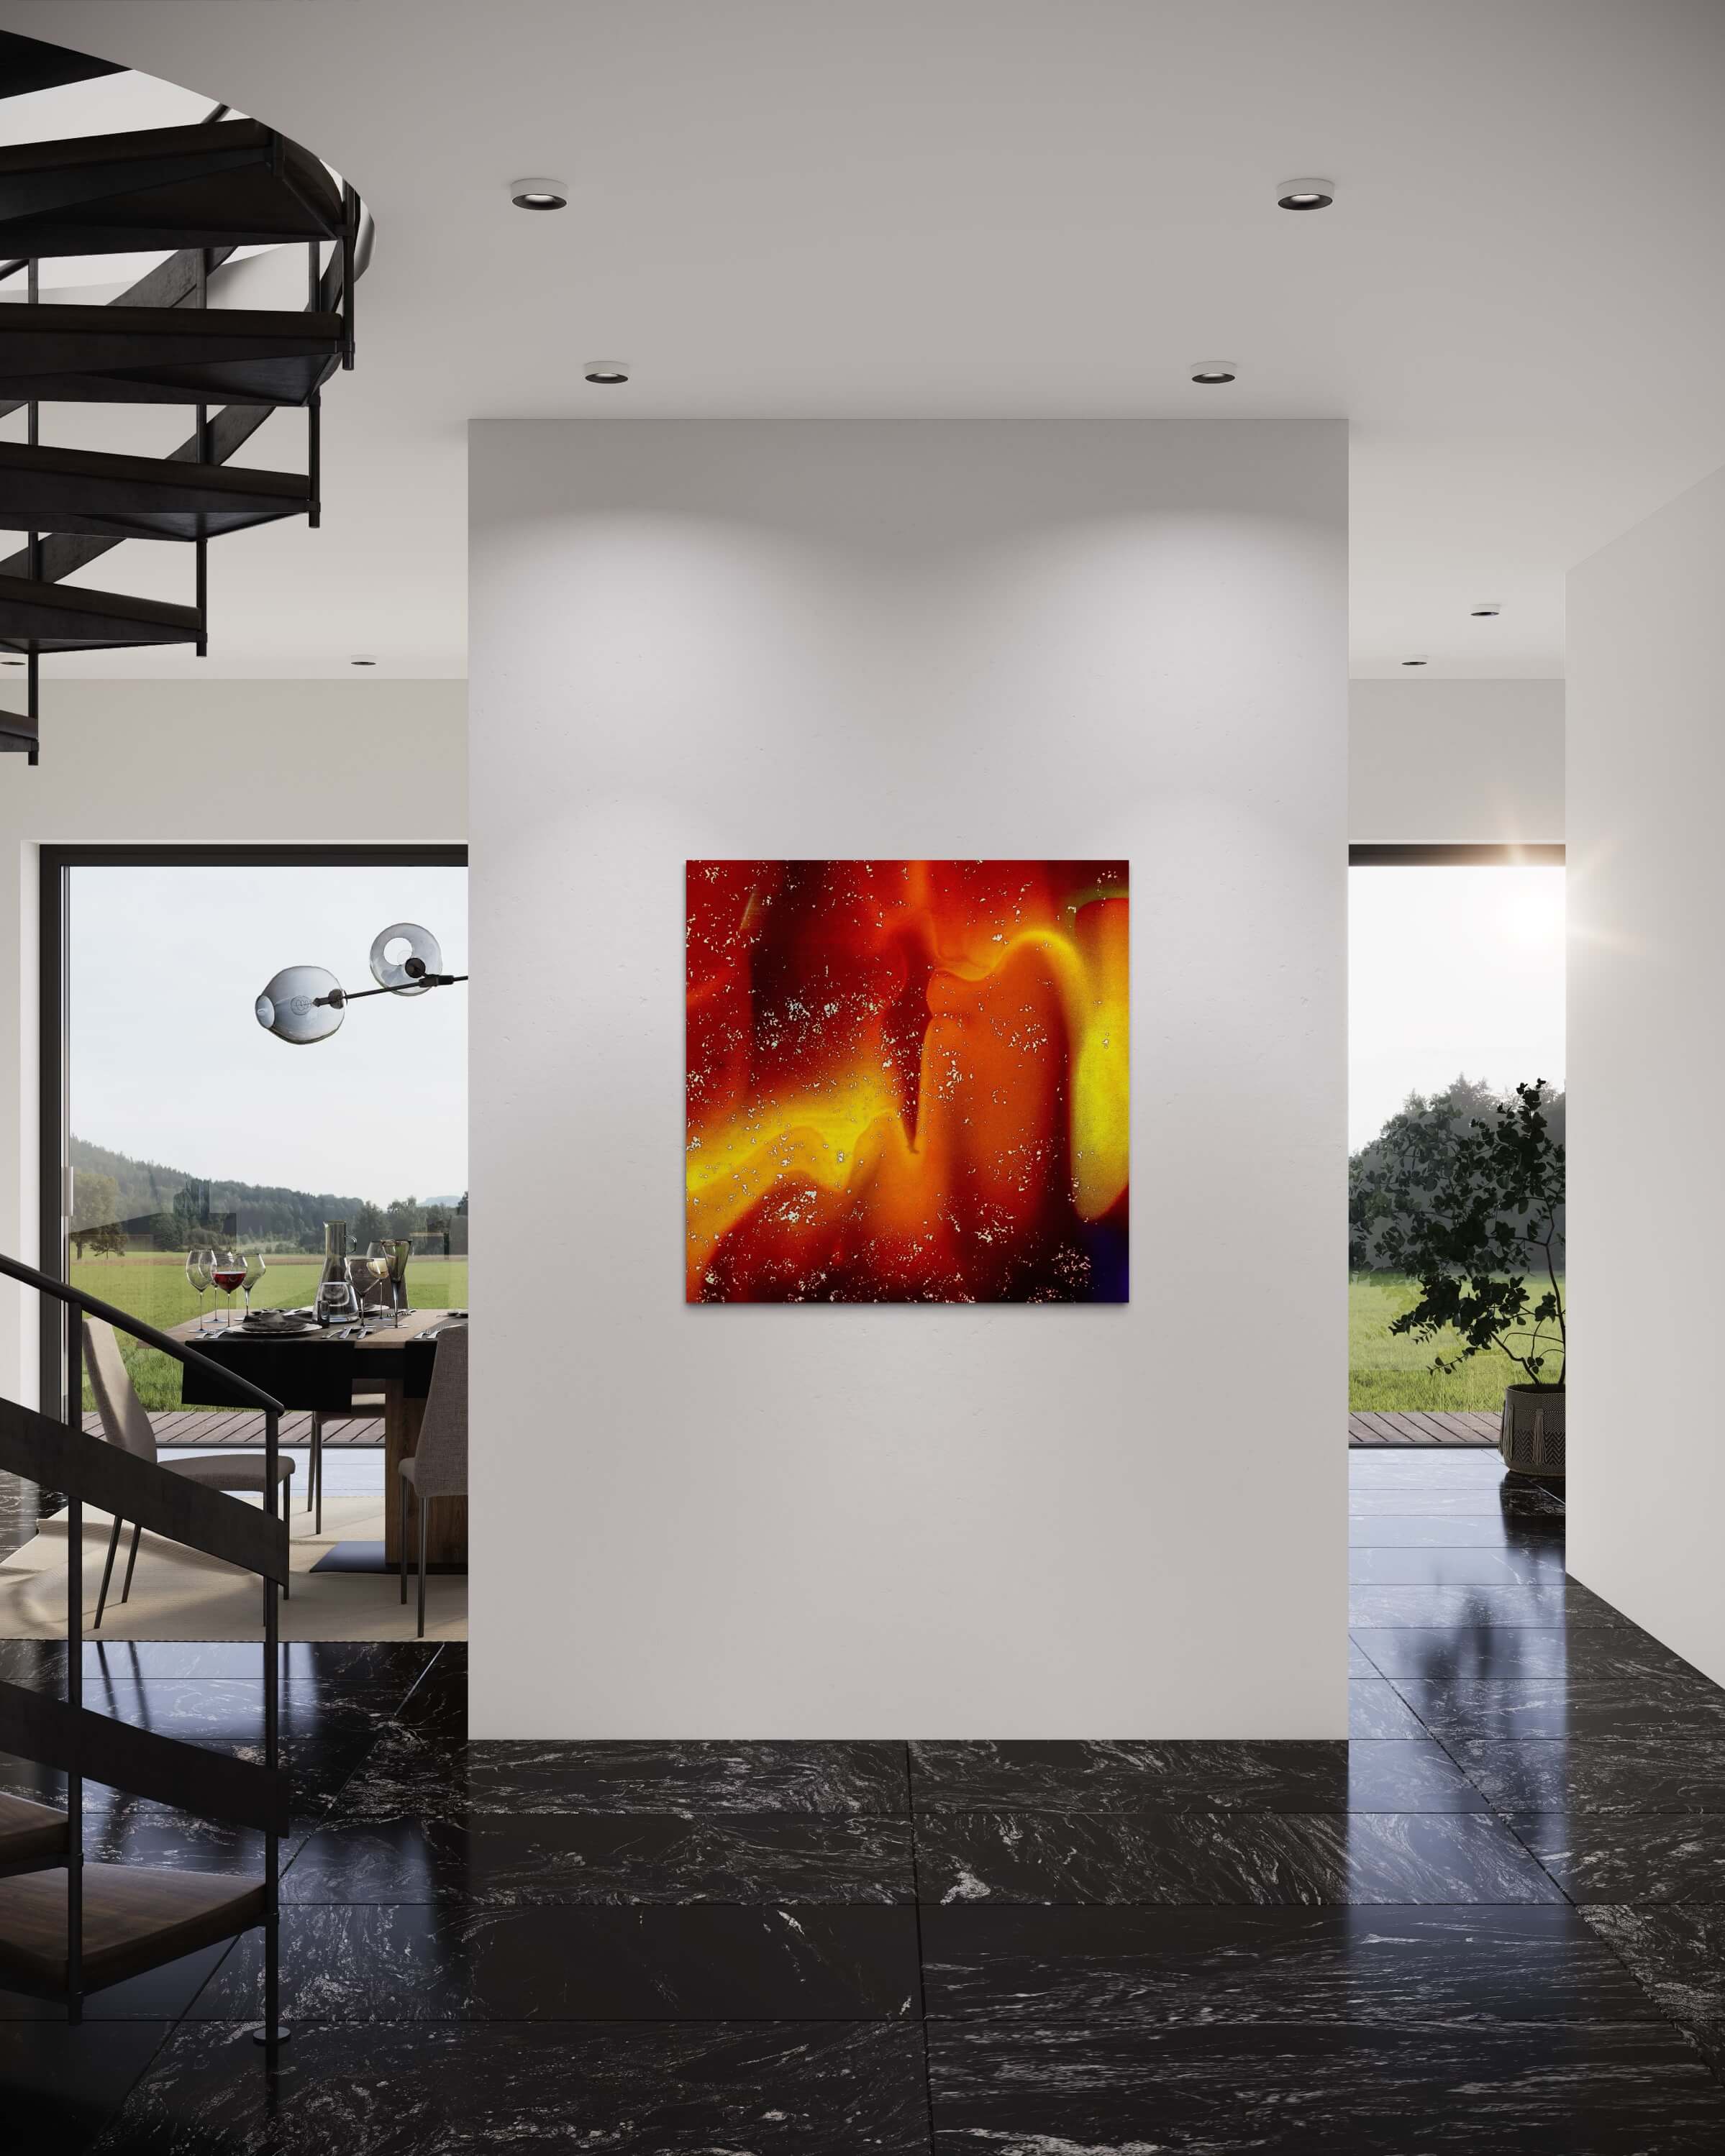 This image displays "Flaming," a vivid artwork, hanging on a white wall in a modern, well-lit interior. The piece features intense reds and yellows with speckles that resemble glowing sparks. The floor is glossy black marble, reflecting the room's open space. A sleek staircase to the left and a glimpse of a dining area with a large window overlooking greenery are also visible, giving a sense of a luxurious, contemporary home.